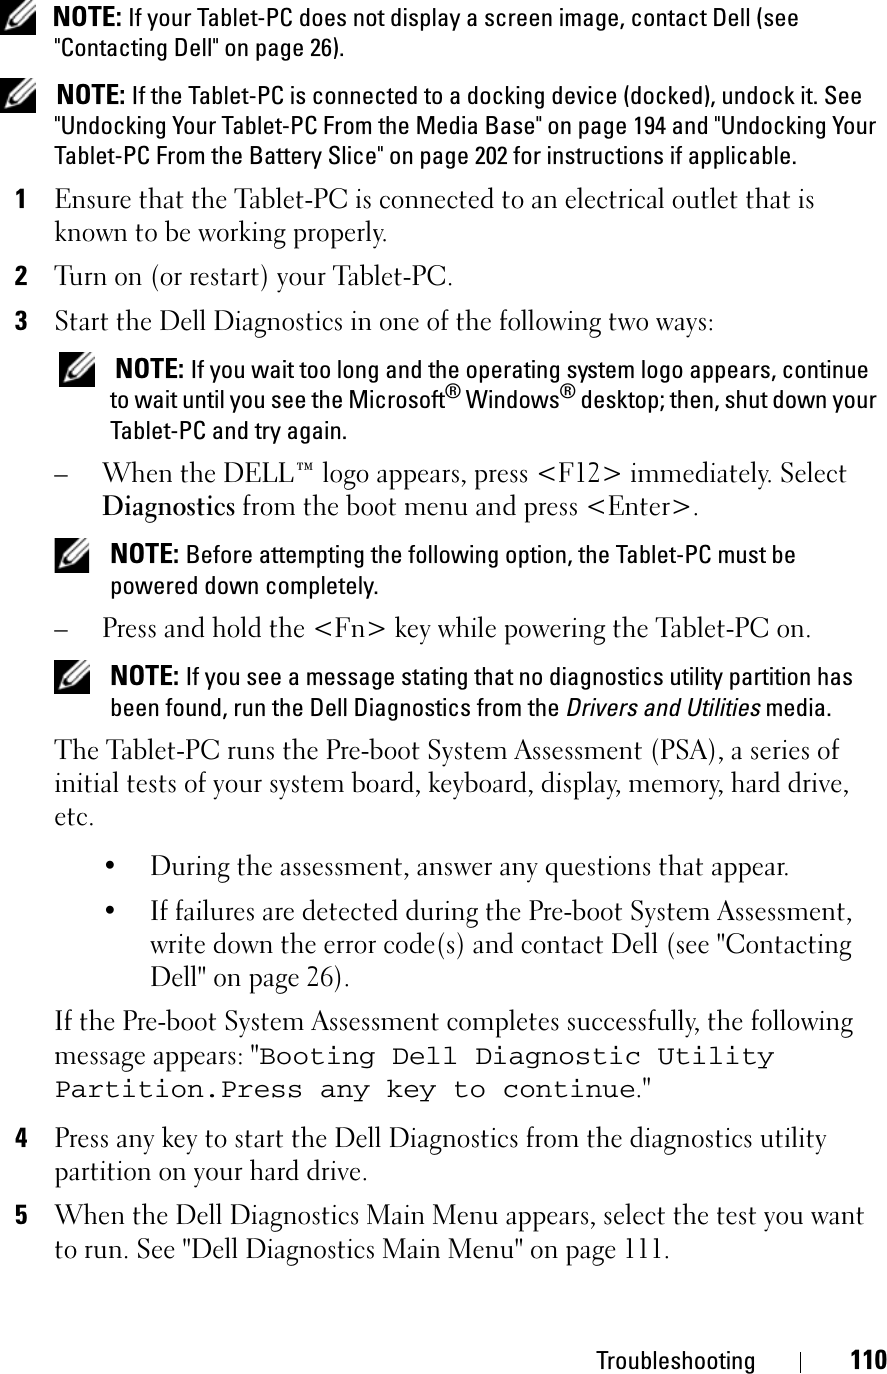 Troubleshooting 110NOTE: If your Tablet-PC does not display a screen image, contact Dell (see &quot;Contacting Dell&quot; on page 26).NOTE: If the Tablet-PC is connected to a docking device (docked), undock it. See &quot;Undocking Your Tablet-PC From the Media Base&quot; on page 194 and &quot;Undocking Your Tablet-PC From the Battery Slice&quot; on page 202 for instructions if applicable.1Ensure that the Tablet-PC is connected to an electrical outlet that is known to be working properly.2Turn on (or restart) your Tablet-PC.3Start the Dell Diagnostics in one of the following two ways:NOTE: If you wait too long and the operating system logo appears, continue to wait until you see the Microsoft® Windows® desktop; then, shut down your Tablet-PC and try again.– When the DELL™ logo appears, press &lt;F12&gt; immediately. Select Diagnostics from the boot menu and press &lt;Enter&gt;.NOTE: Before attempting the following option, the Tablet-PC must be powered down completely.– Press and hold the &lt;Fn&gt; key while powering the Tablet-PC on.NOTE: If you see a message stating that no diagnostics utility partition has been found, run the Dell Diagnostics from the Drivers and Utilities media.The Tablet-PC runs the Pre-boot System Assessment (PSA), a series of initial tests of your system board, keyboard, display, memory, hard drive, etc.• During the assessment, answer any questions that appear.• If failures are detected during the Pre-boot System Assessment, write down the error code(s) and contact Dell (see &quot;Contacting Dell&quot; on page 26).If the Pre-boot System Assessment completes successfully, the following message appears: &quot;Booting Dell Diagnostic Utility Partition.Press any key to continue.&quot;4Press any key to start the Dell Diagnostics from the diagnostics utility partition on your hard drive.5When the Dell Diagnostics Main Menu appears, select the test you want to run. See &quot;Dell Diagnostics Main Menu&quot; on page 111.